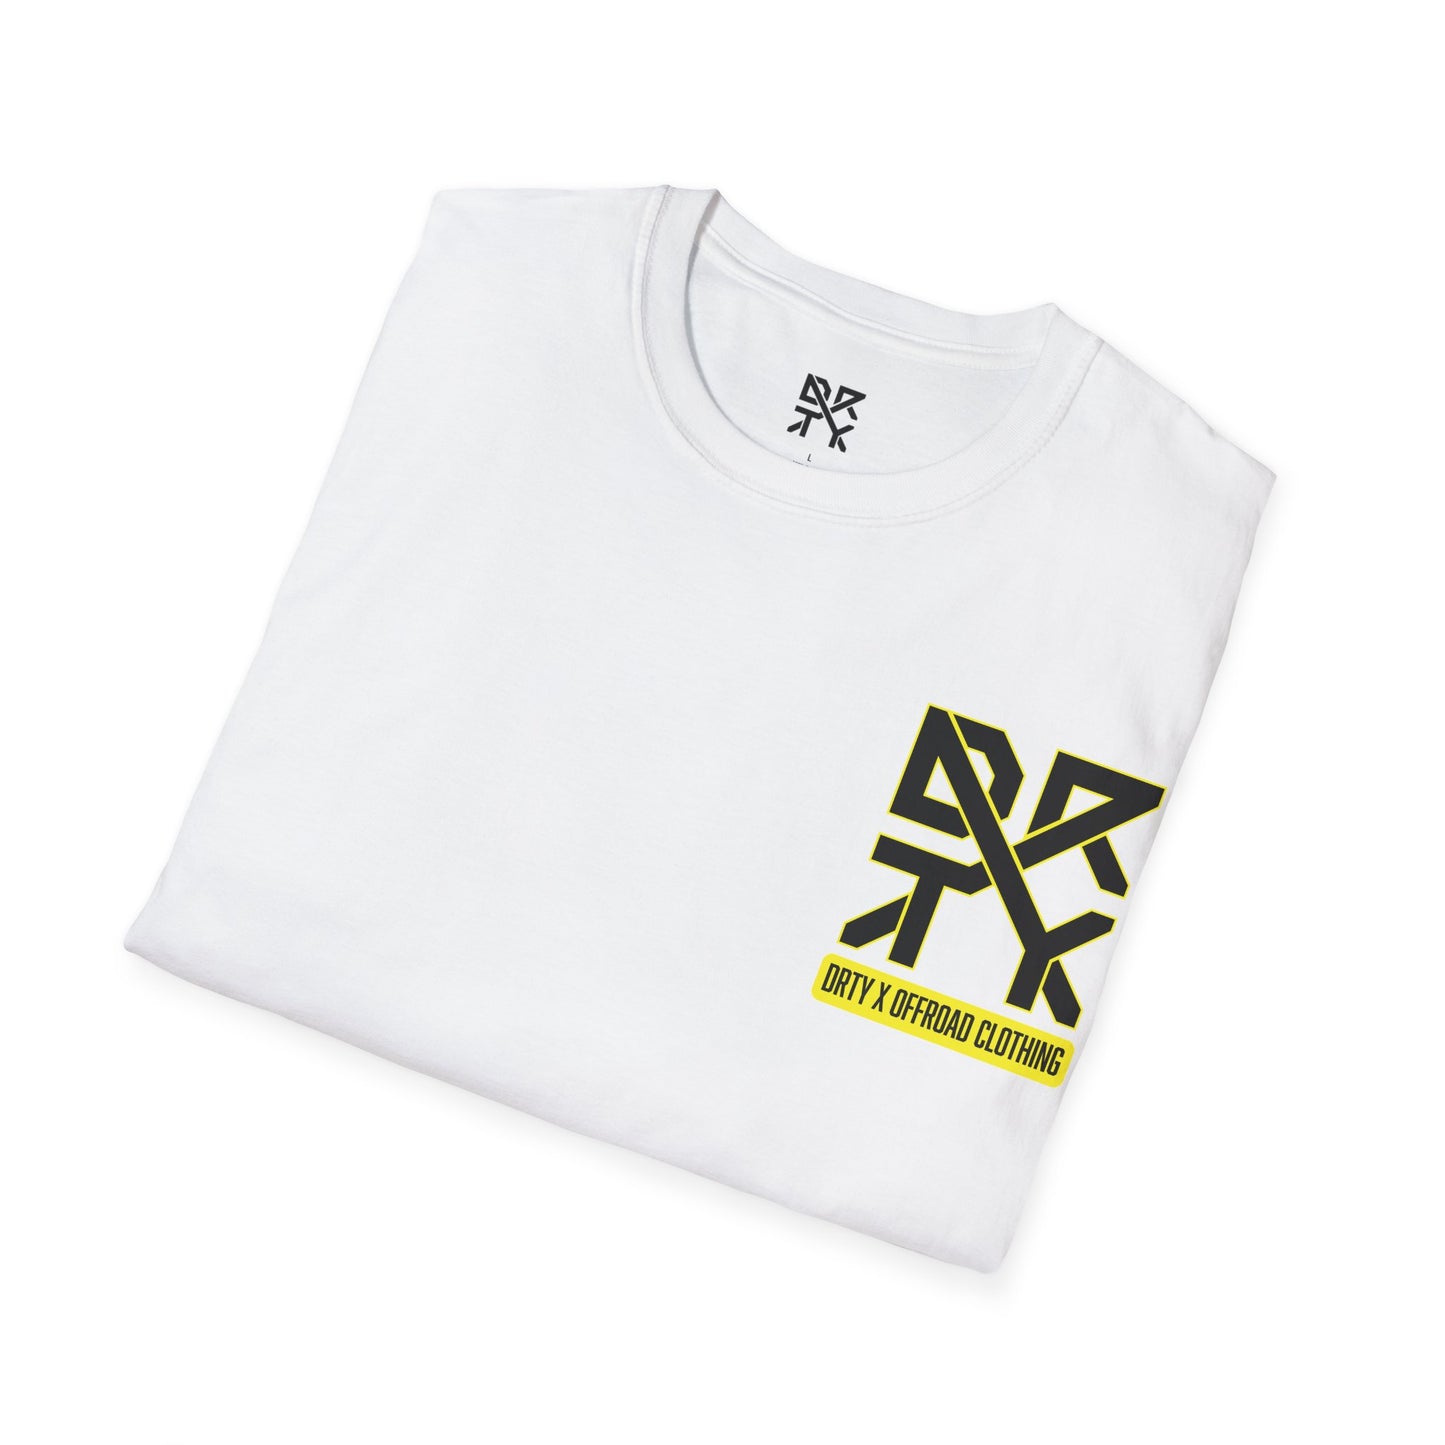 This image showcases a folded view of a T-shirt collar and left front chest with a DRTY X logo printed in both locations.